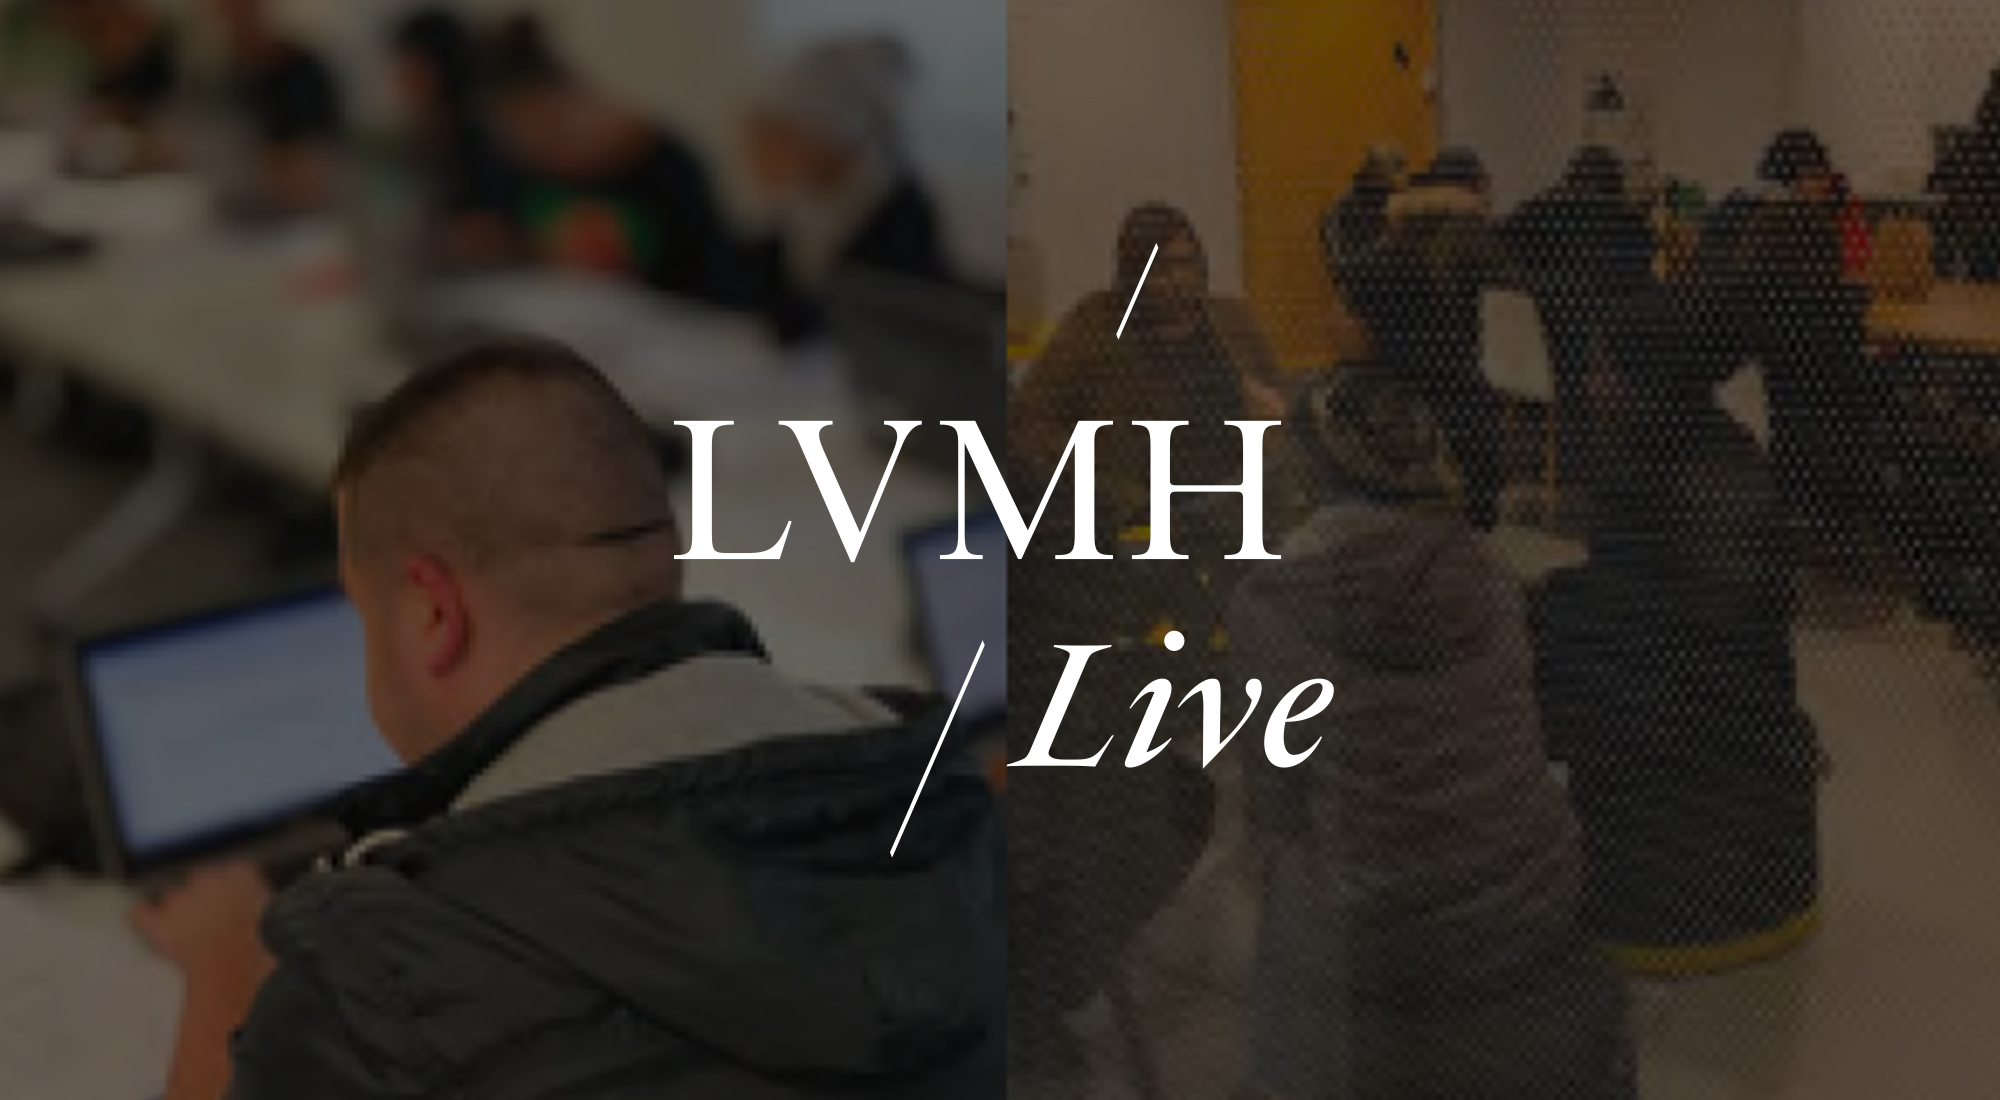 25 Years of LIFE 2020 Program by LVMH 